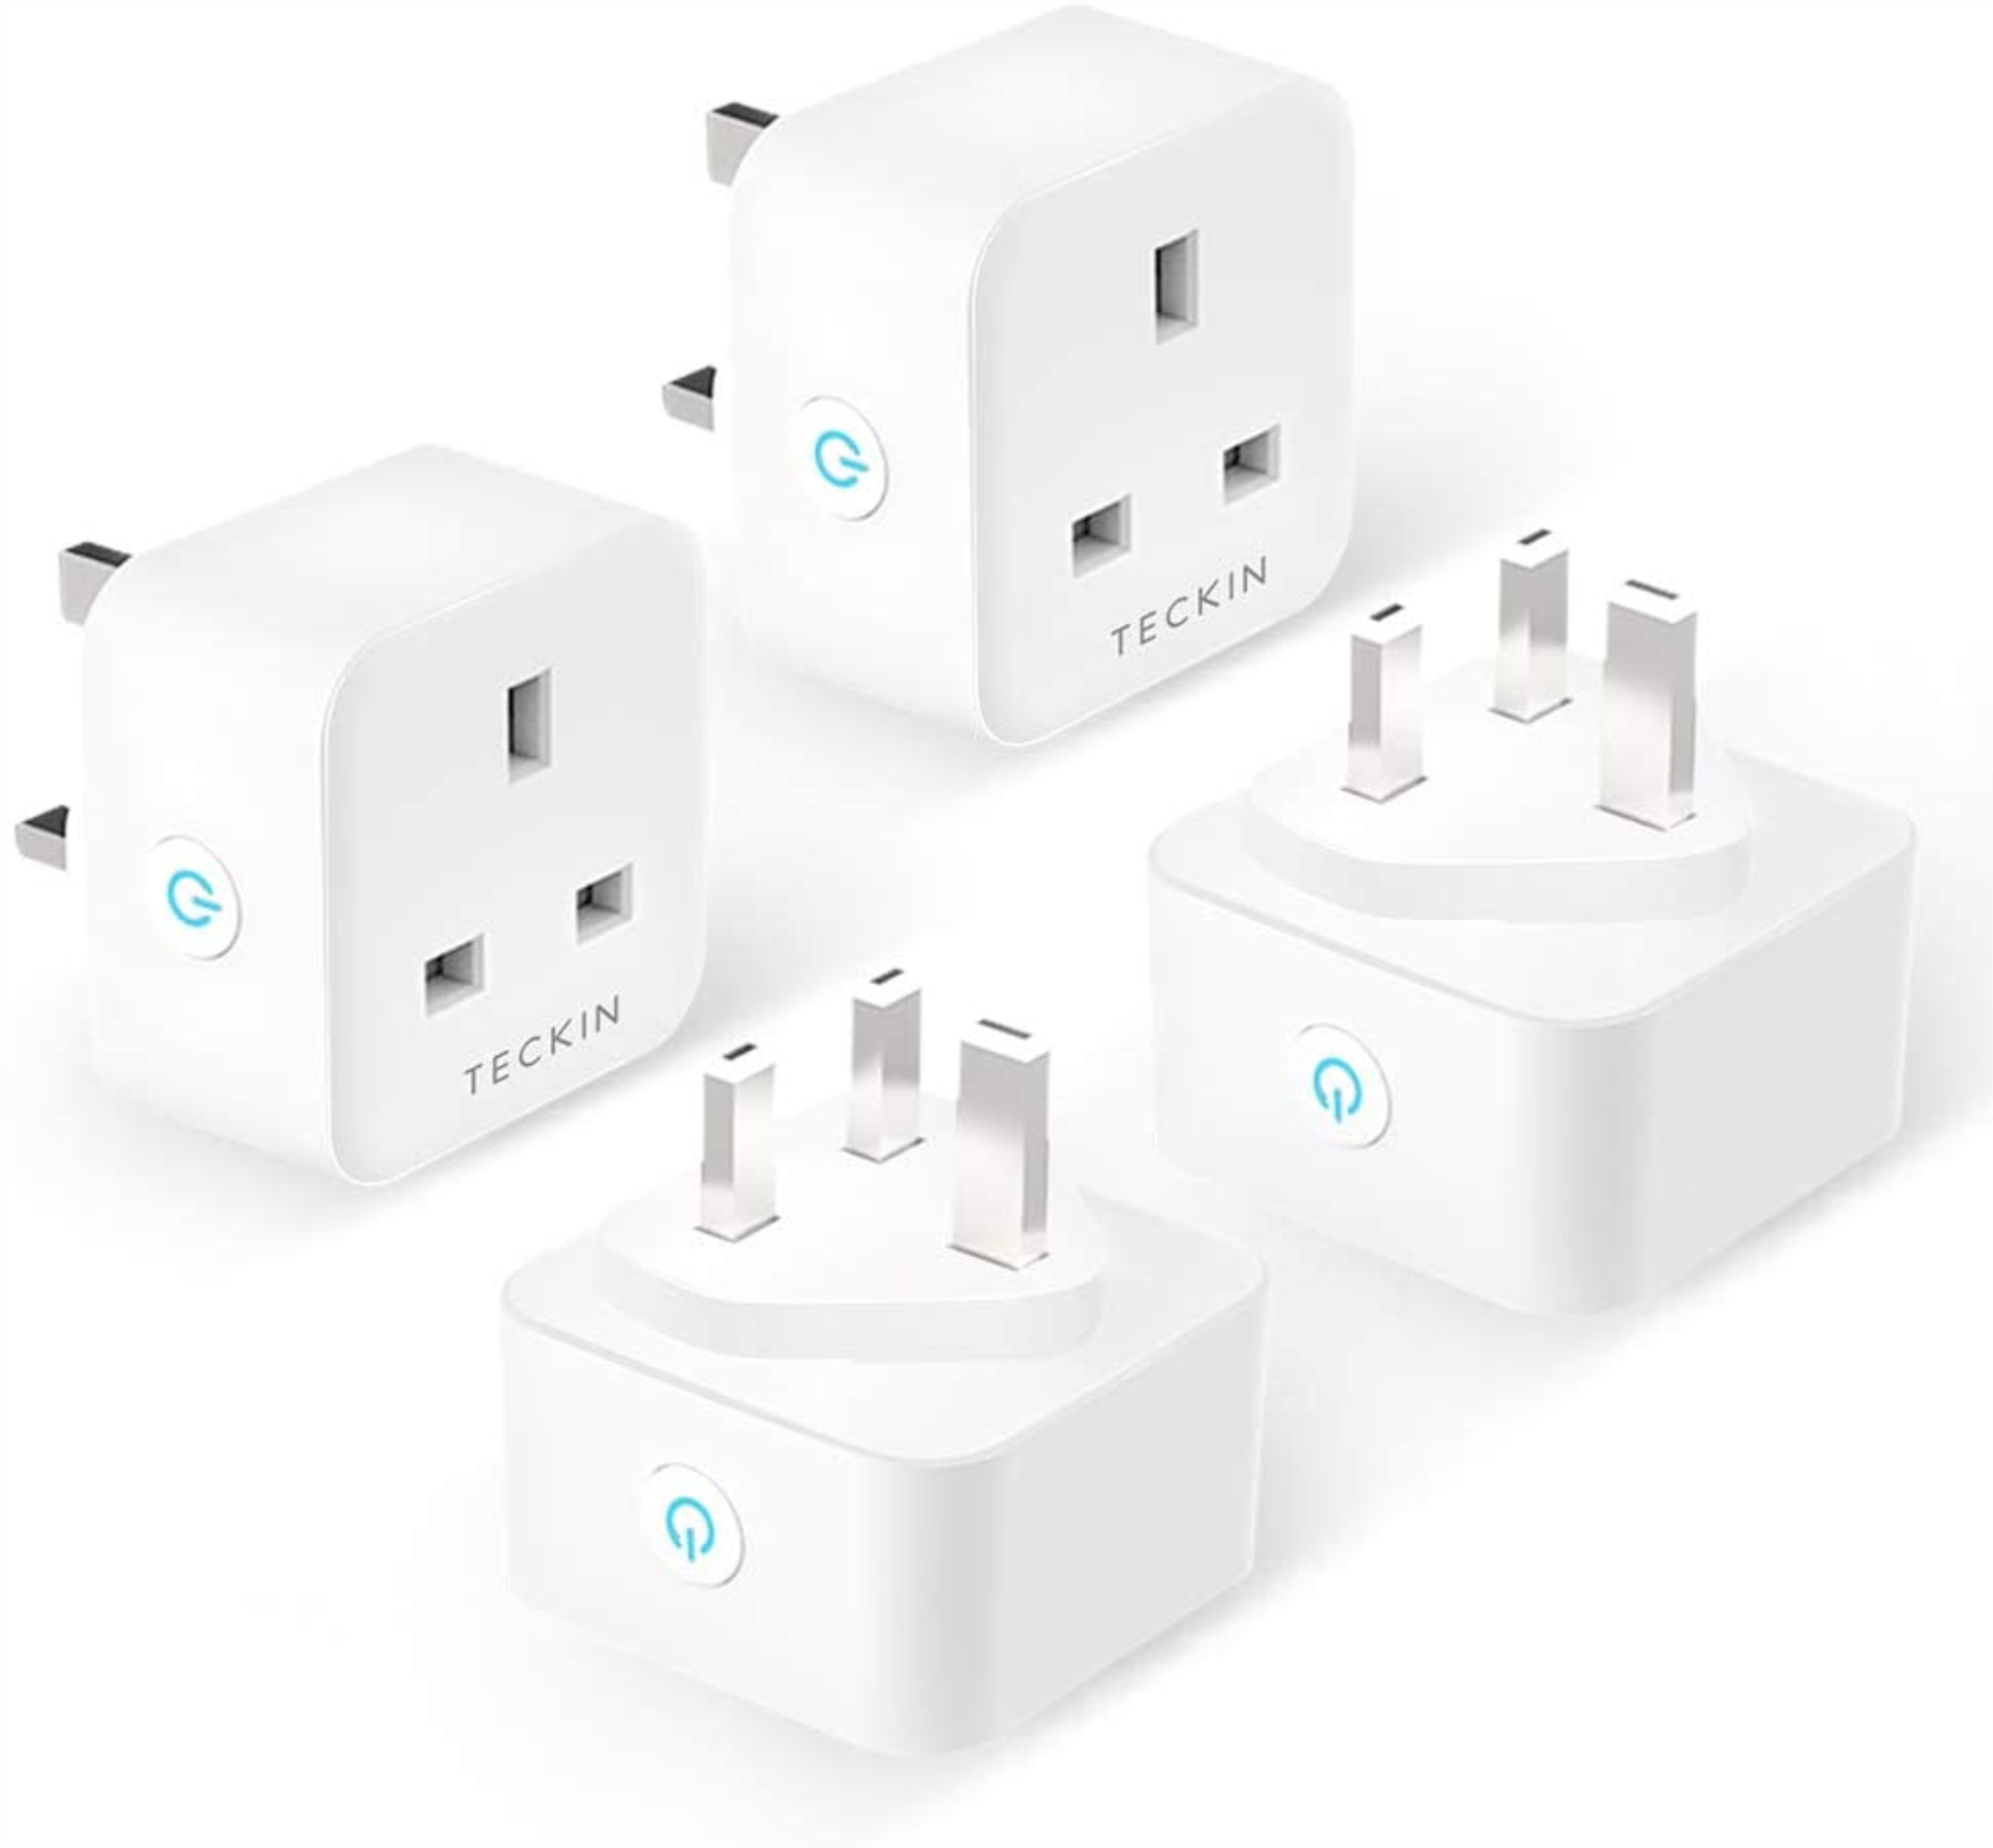 WHOLESALE Teckin SP27/SP23 Smart Plug (New and old versions are shipped randomly)